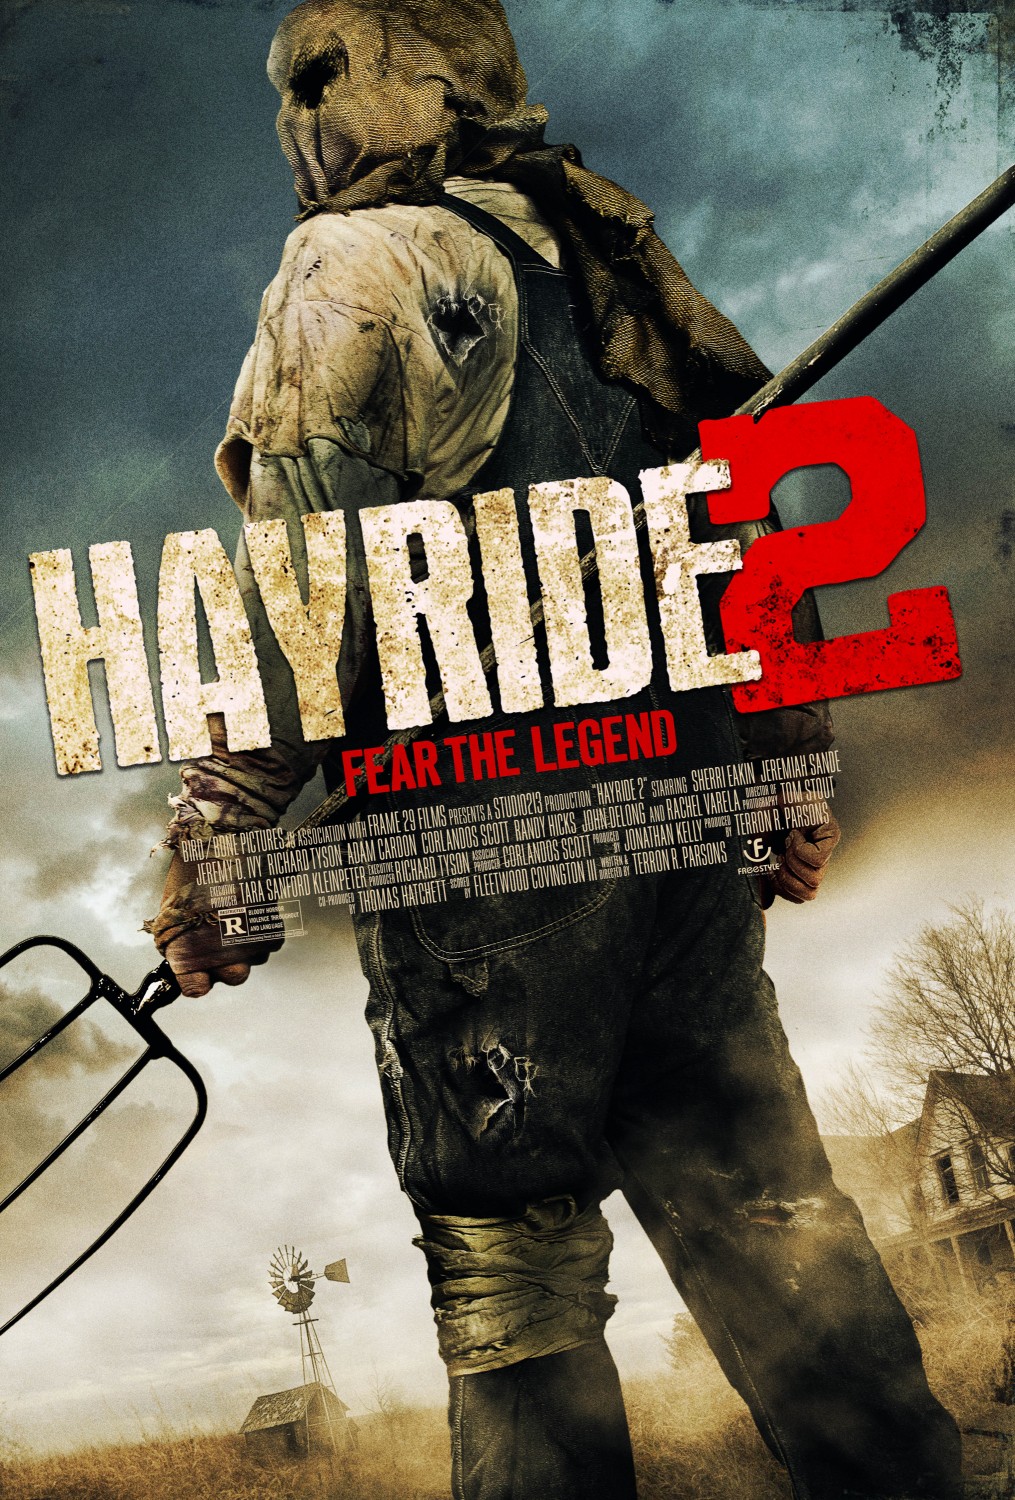 Extra Large Movie Poster Image for Hayride 2 